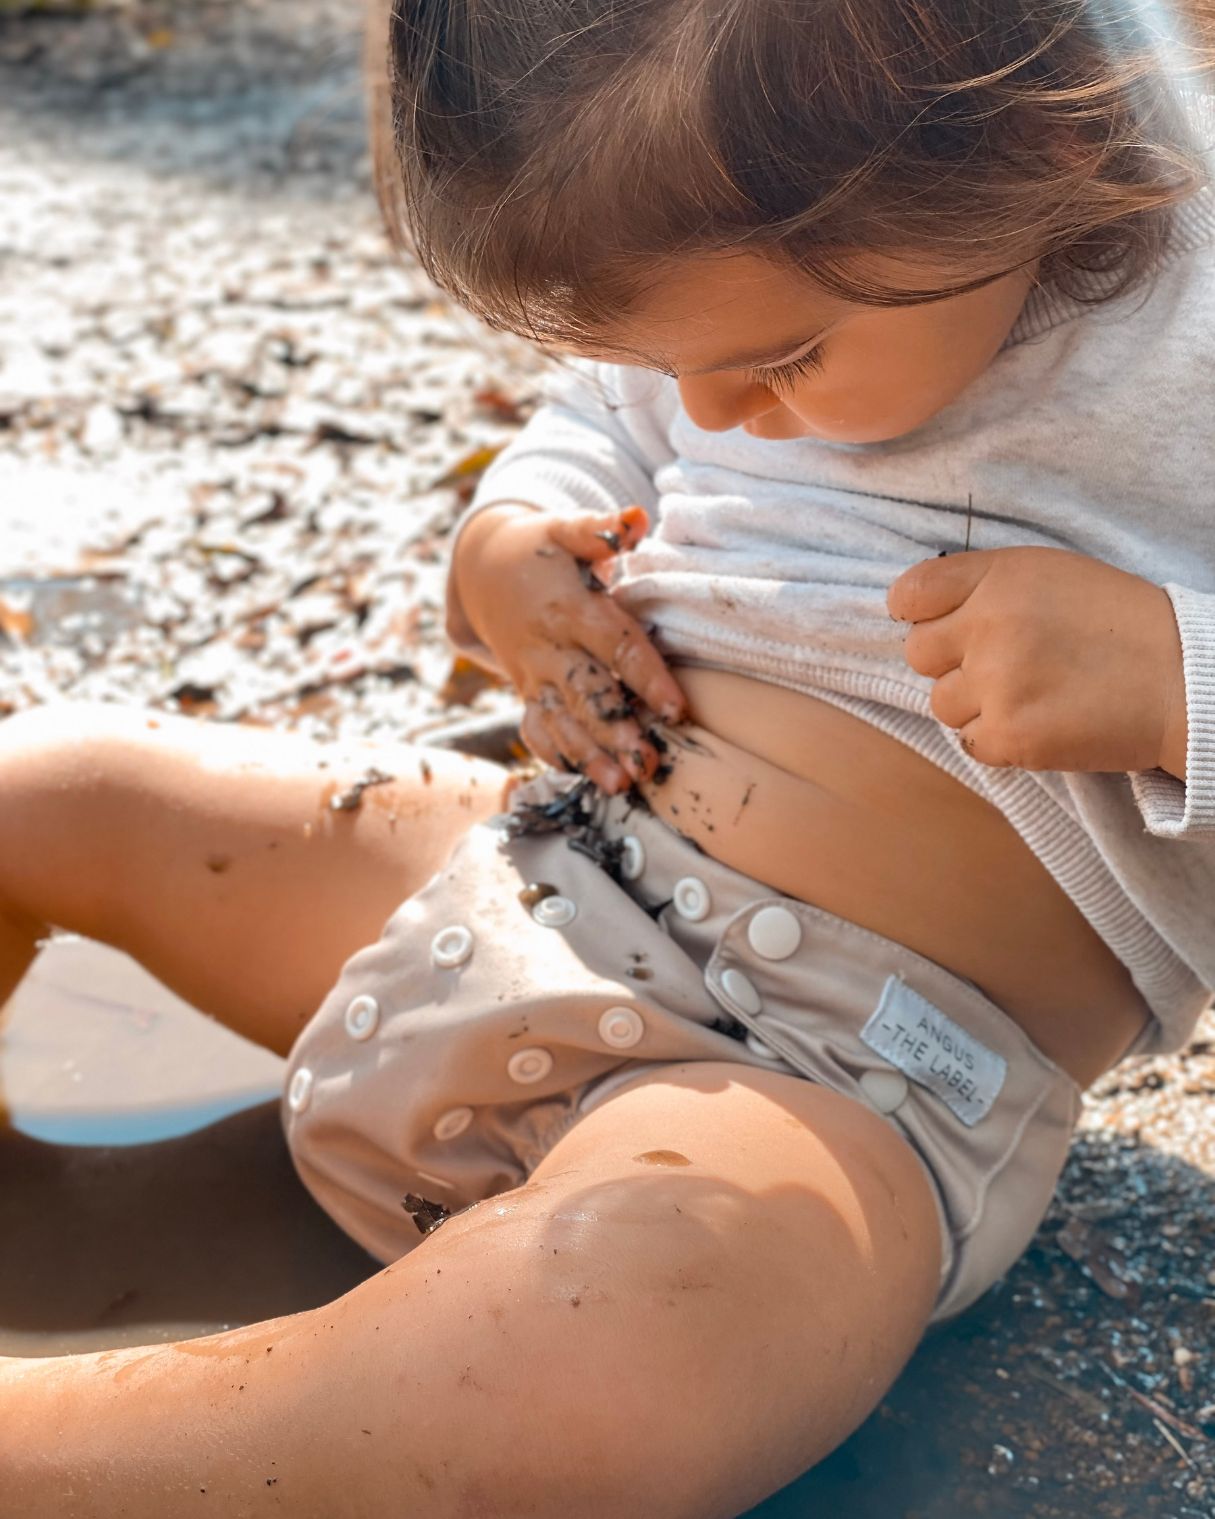 Toddler sits rubbing mud on her belly wearing a tan modern cloth nappy and grey shirt